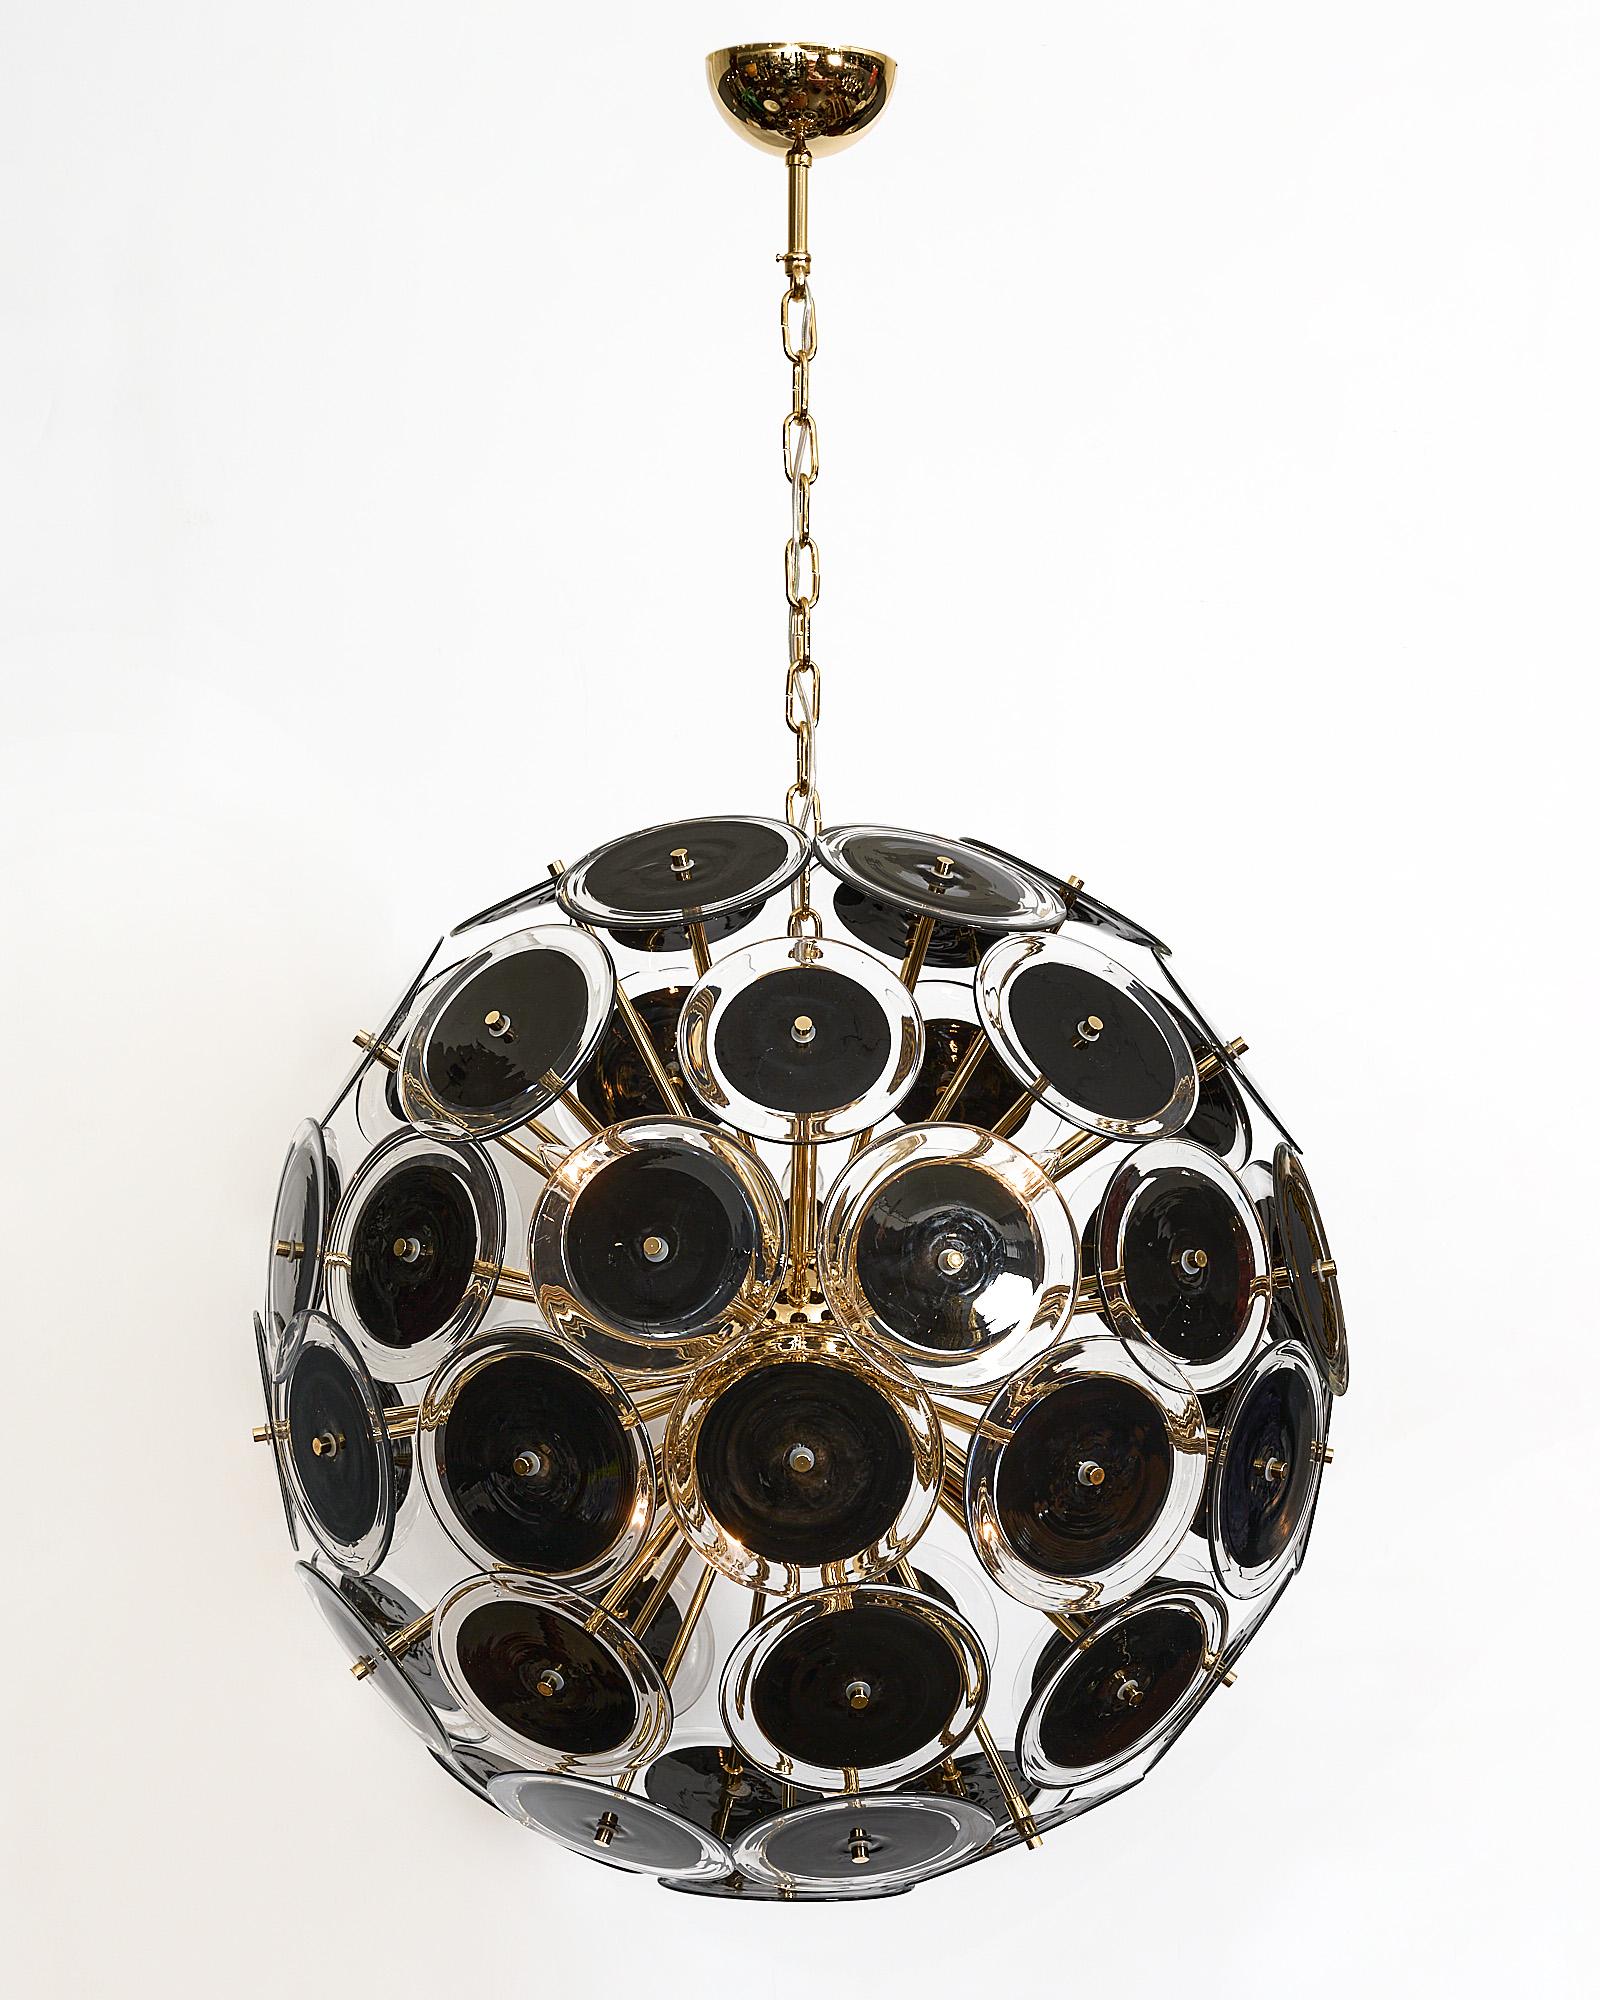 Murano glass chandelier in the sputnik shape with beautiful hand-blown glass discs. Each disc element has opaque black glass rimmed with clear glass. It has been newly wired to fit US standards.

This pair is currently a special order from our